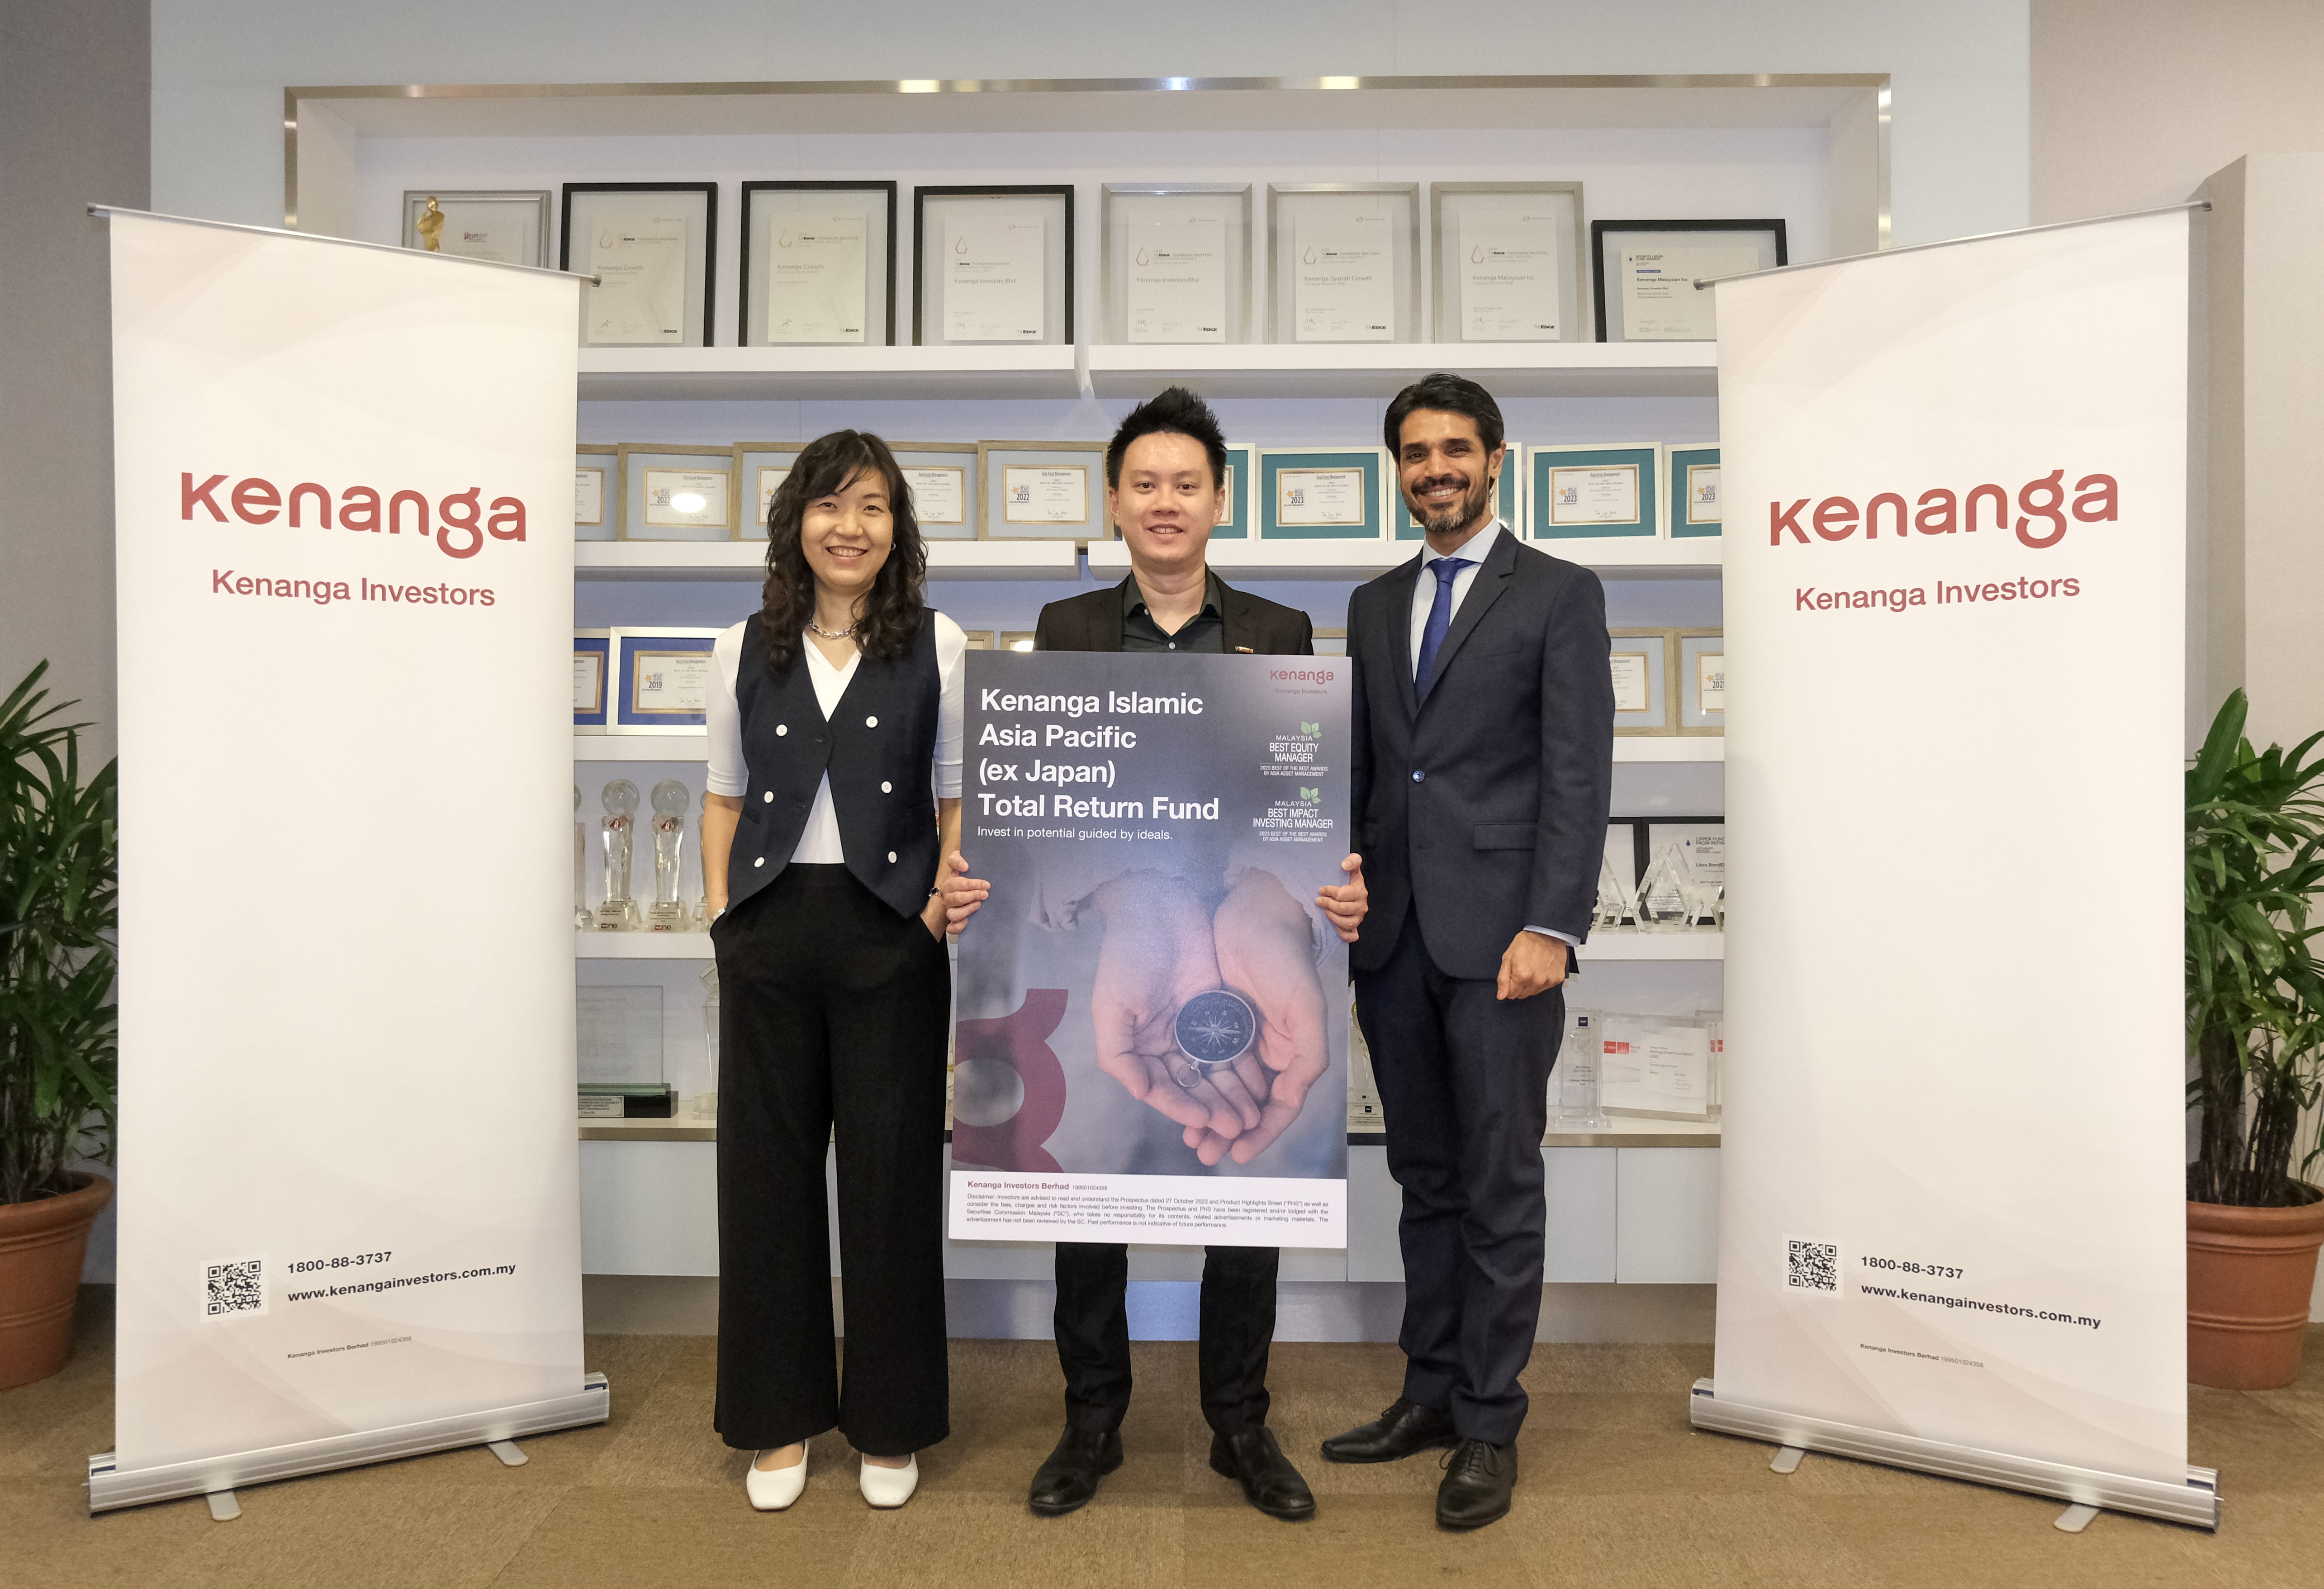 From left to right: Lee Sook Yee, Chief Investment Officer, Christopher Kok, Head, Equities and Ranjit Gill, Head, Product Development at the launch of the Kenanga Islamic Asia Pacific (ex Japan) Total Return Fund.